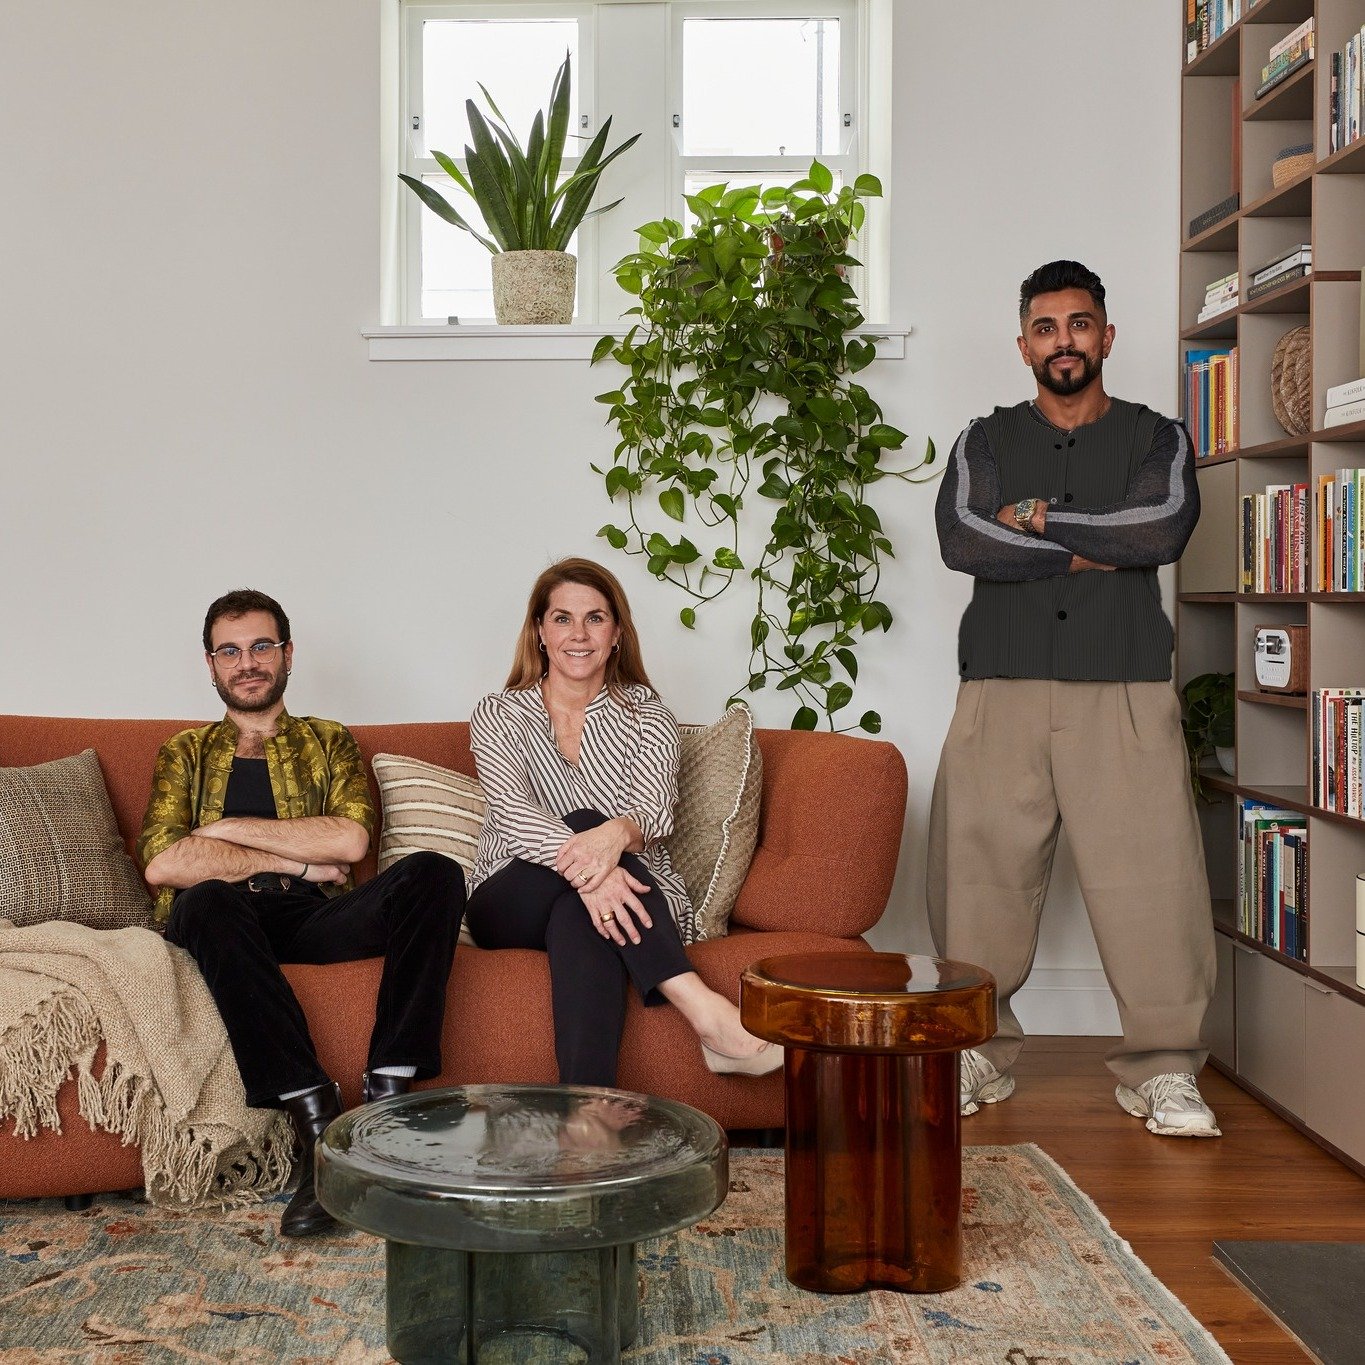 ✍️ Meet the creative force behind Space Shack &ndash; a trio of design visionaries whose distinct roles interweave to bring your dream spaces to life. At the helm, Omar, our Founder and Design Director, breathes life into each project with innovative